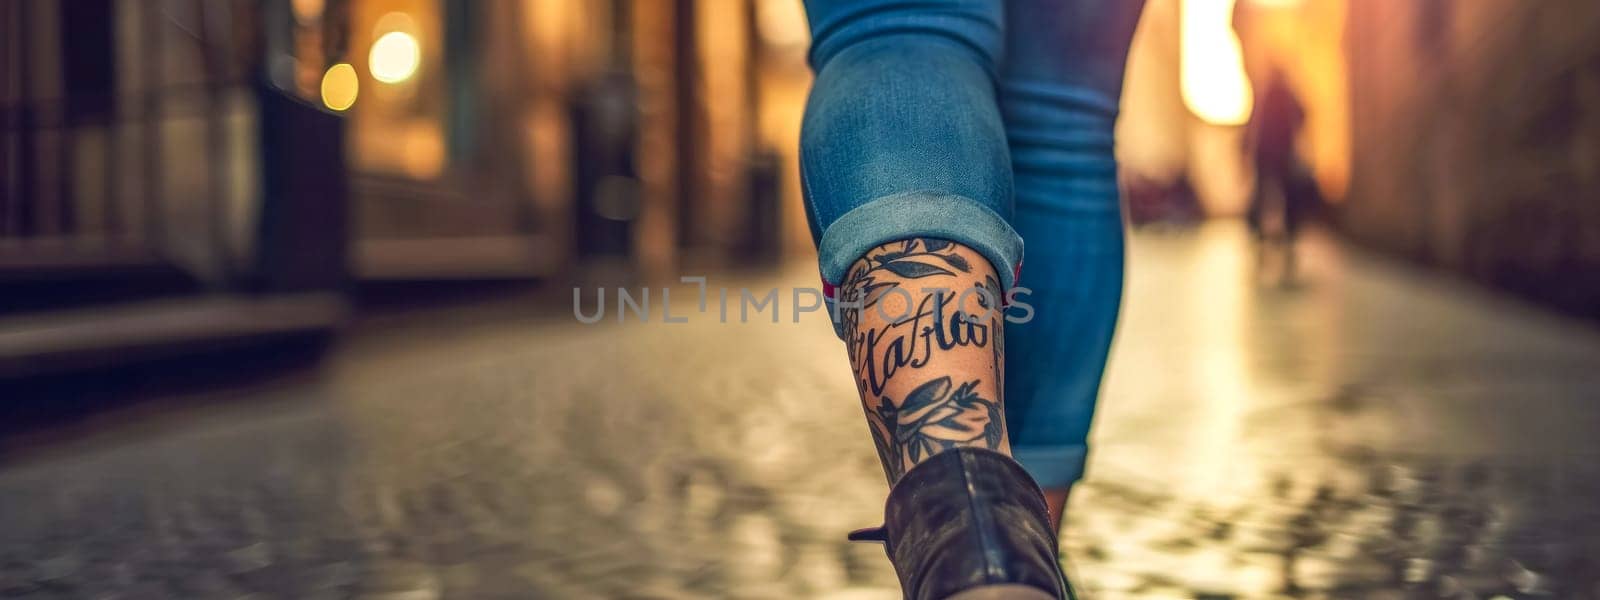 tattooed leg with the word "Tattoo" inked amongst floral designs, set against the backdrop of a blurred, warmly lit street scene, adding a dynamic urban feel to the personal expression of body art by Edophoto